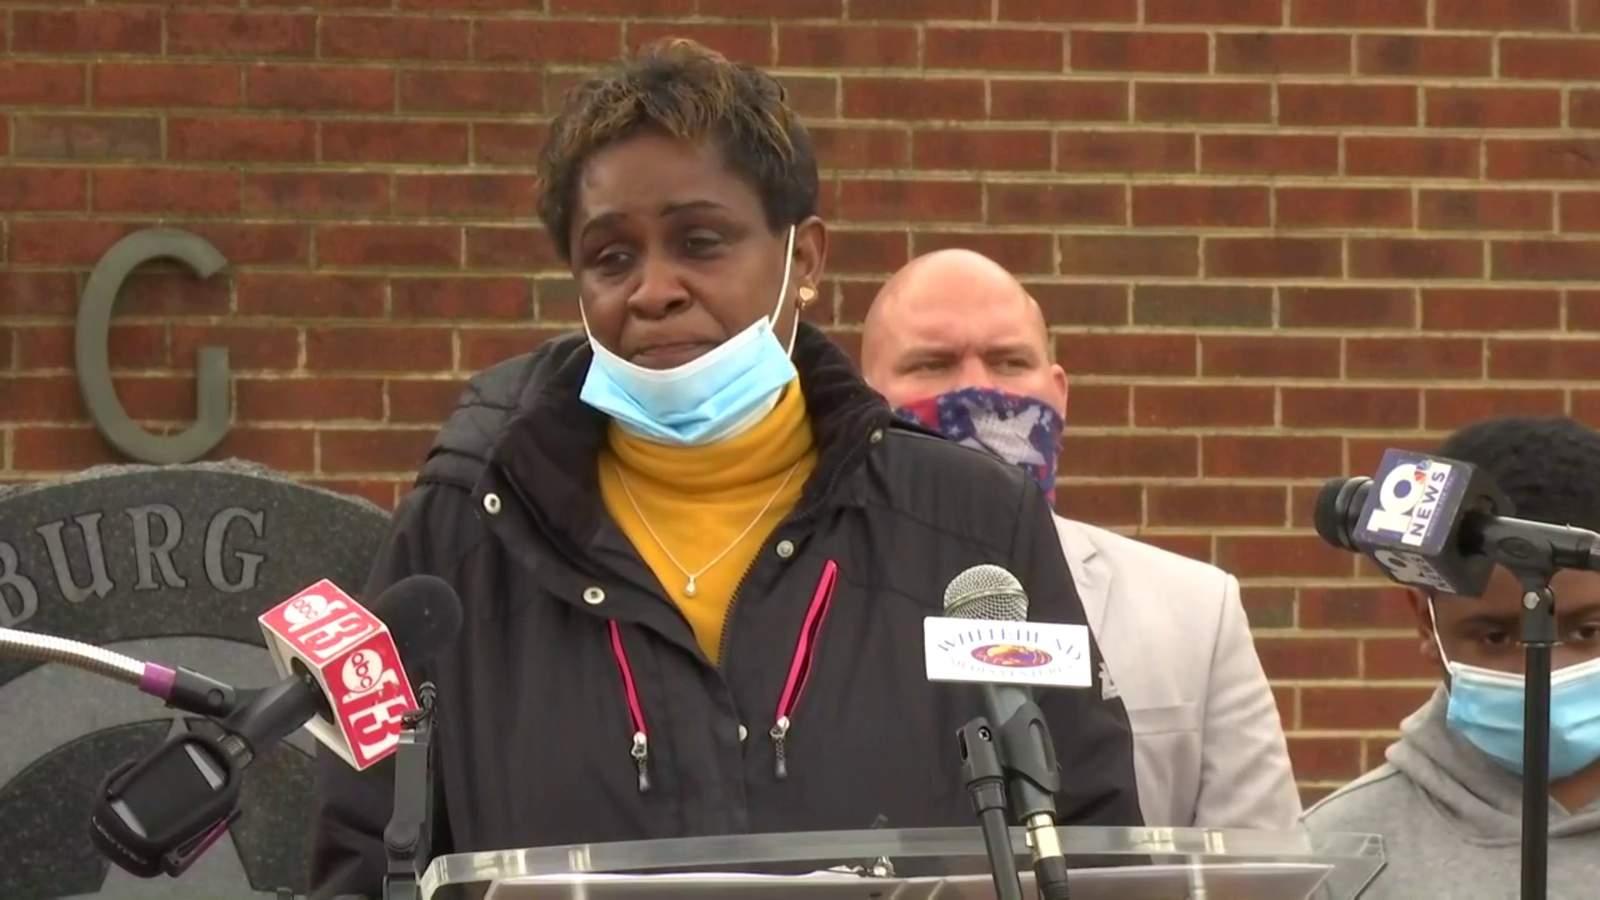 WATCH: Lynchburg police chief, mother of woman shot dead hold press conference